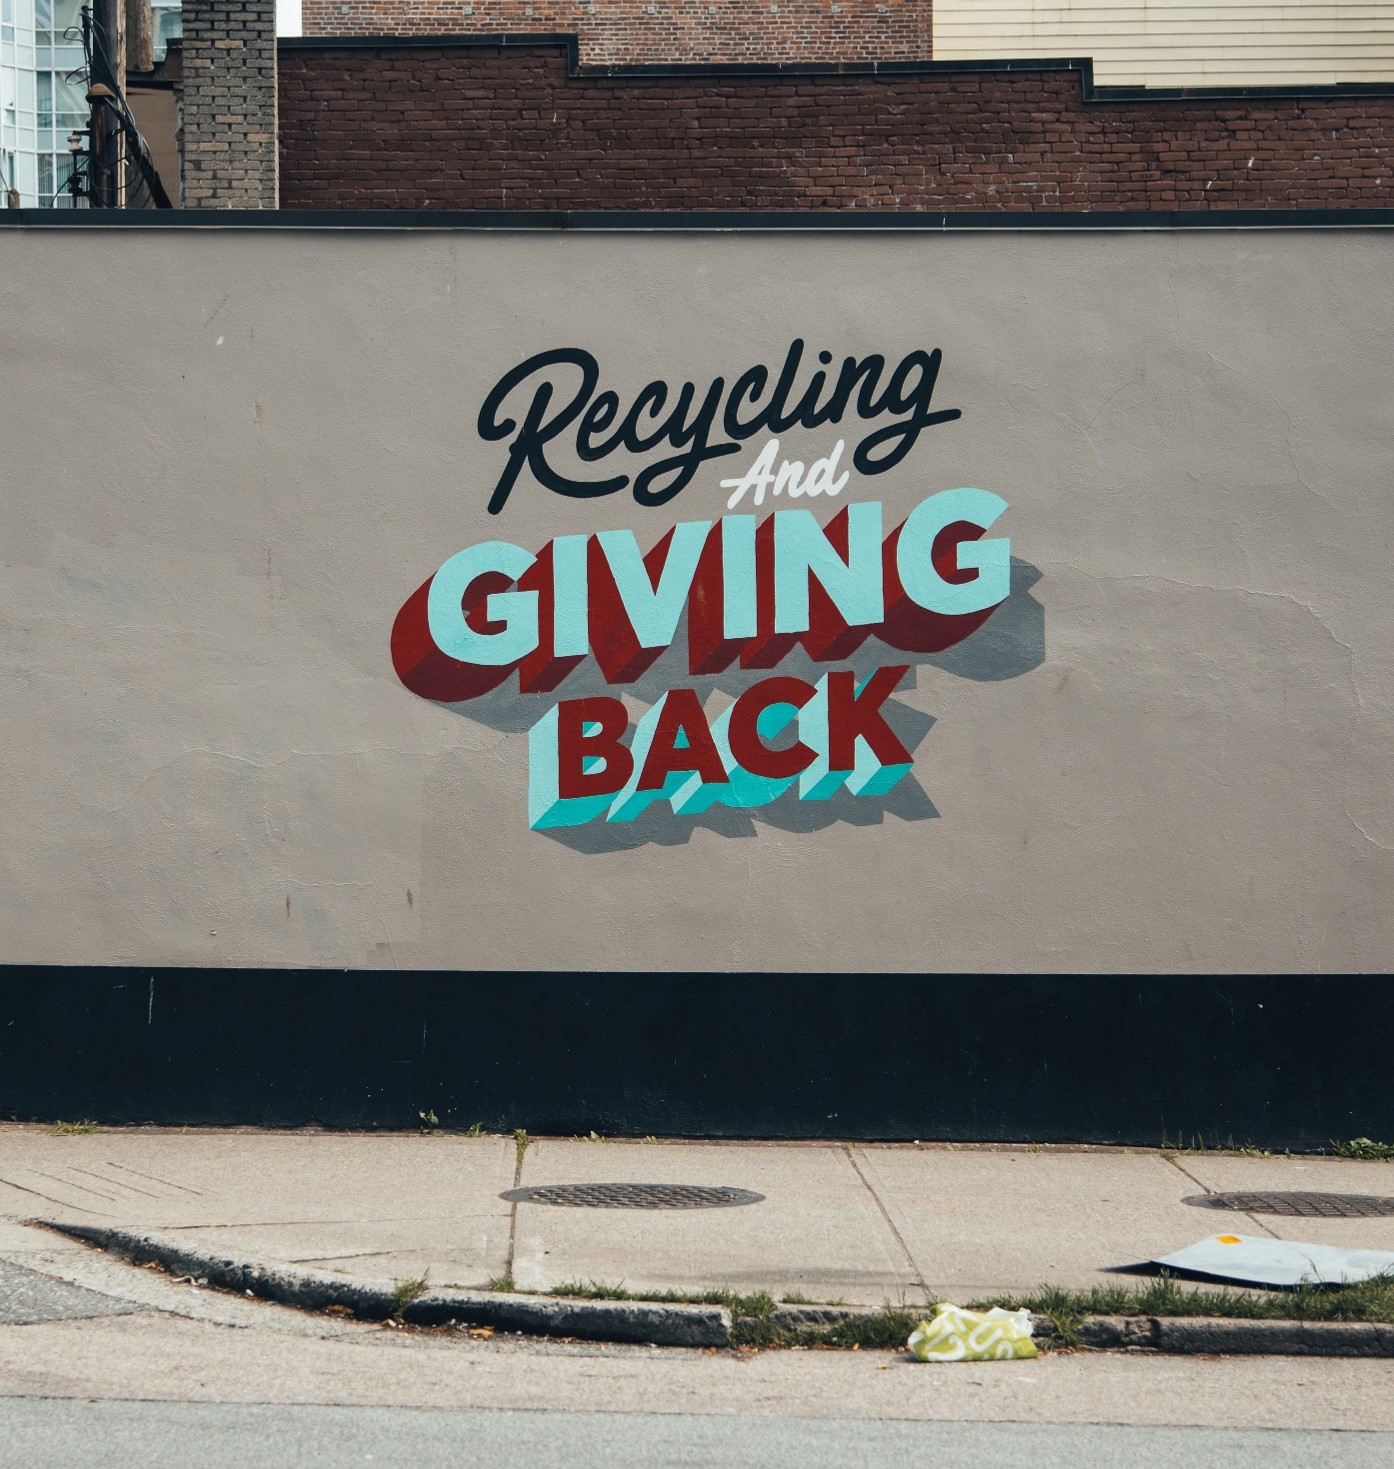 Recycling and giving back